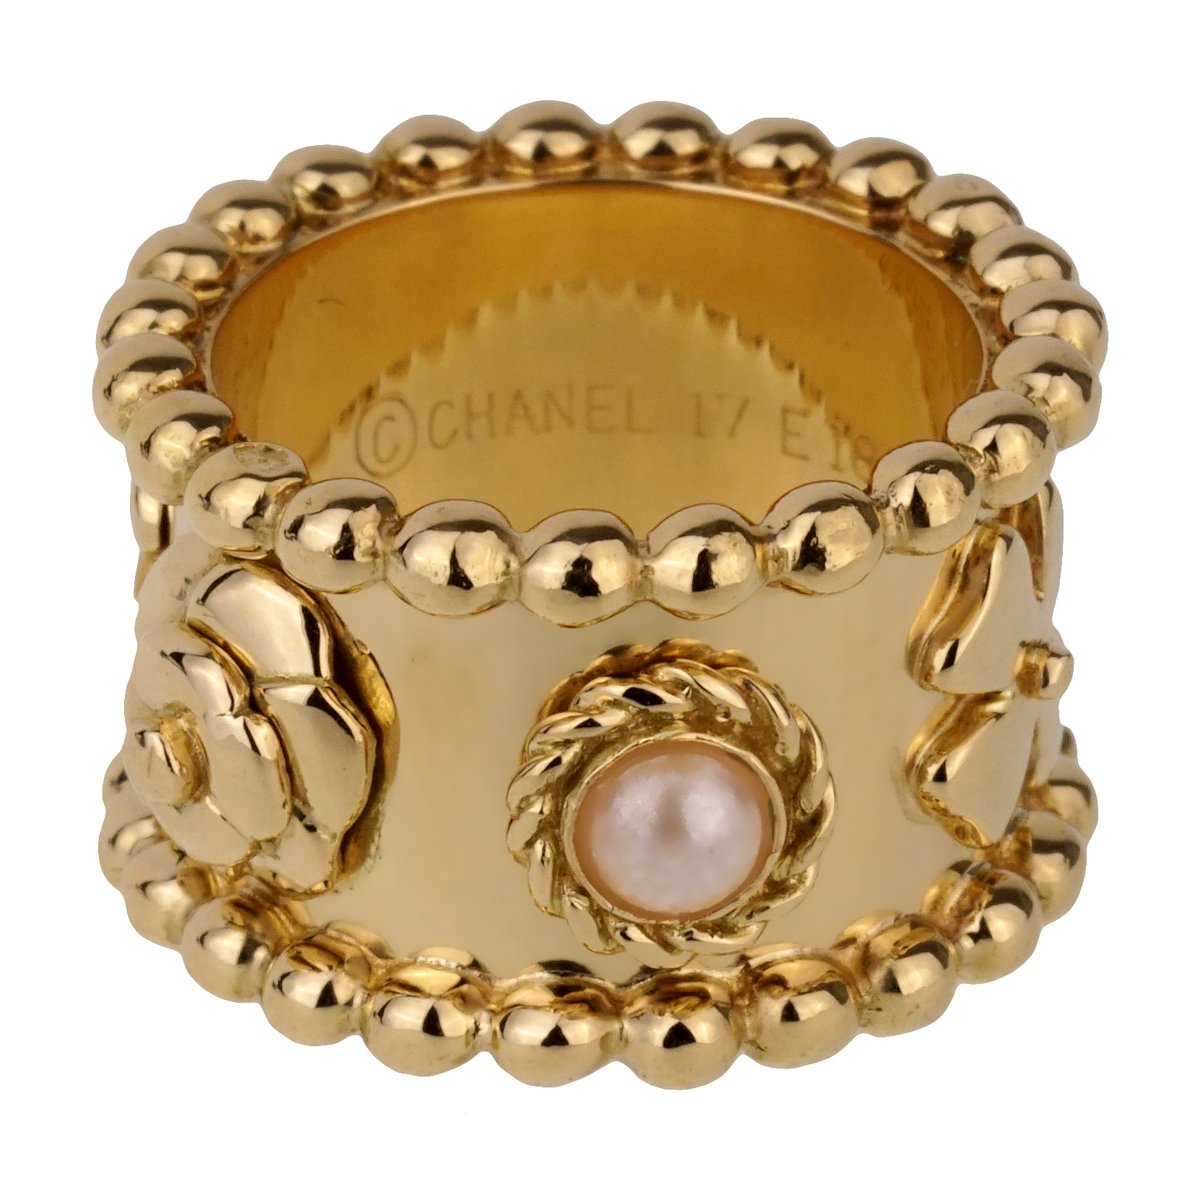 Chanel Coco Crush Toi et Moi Large Ring, 54